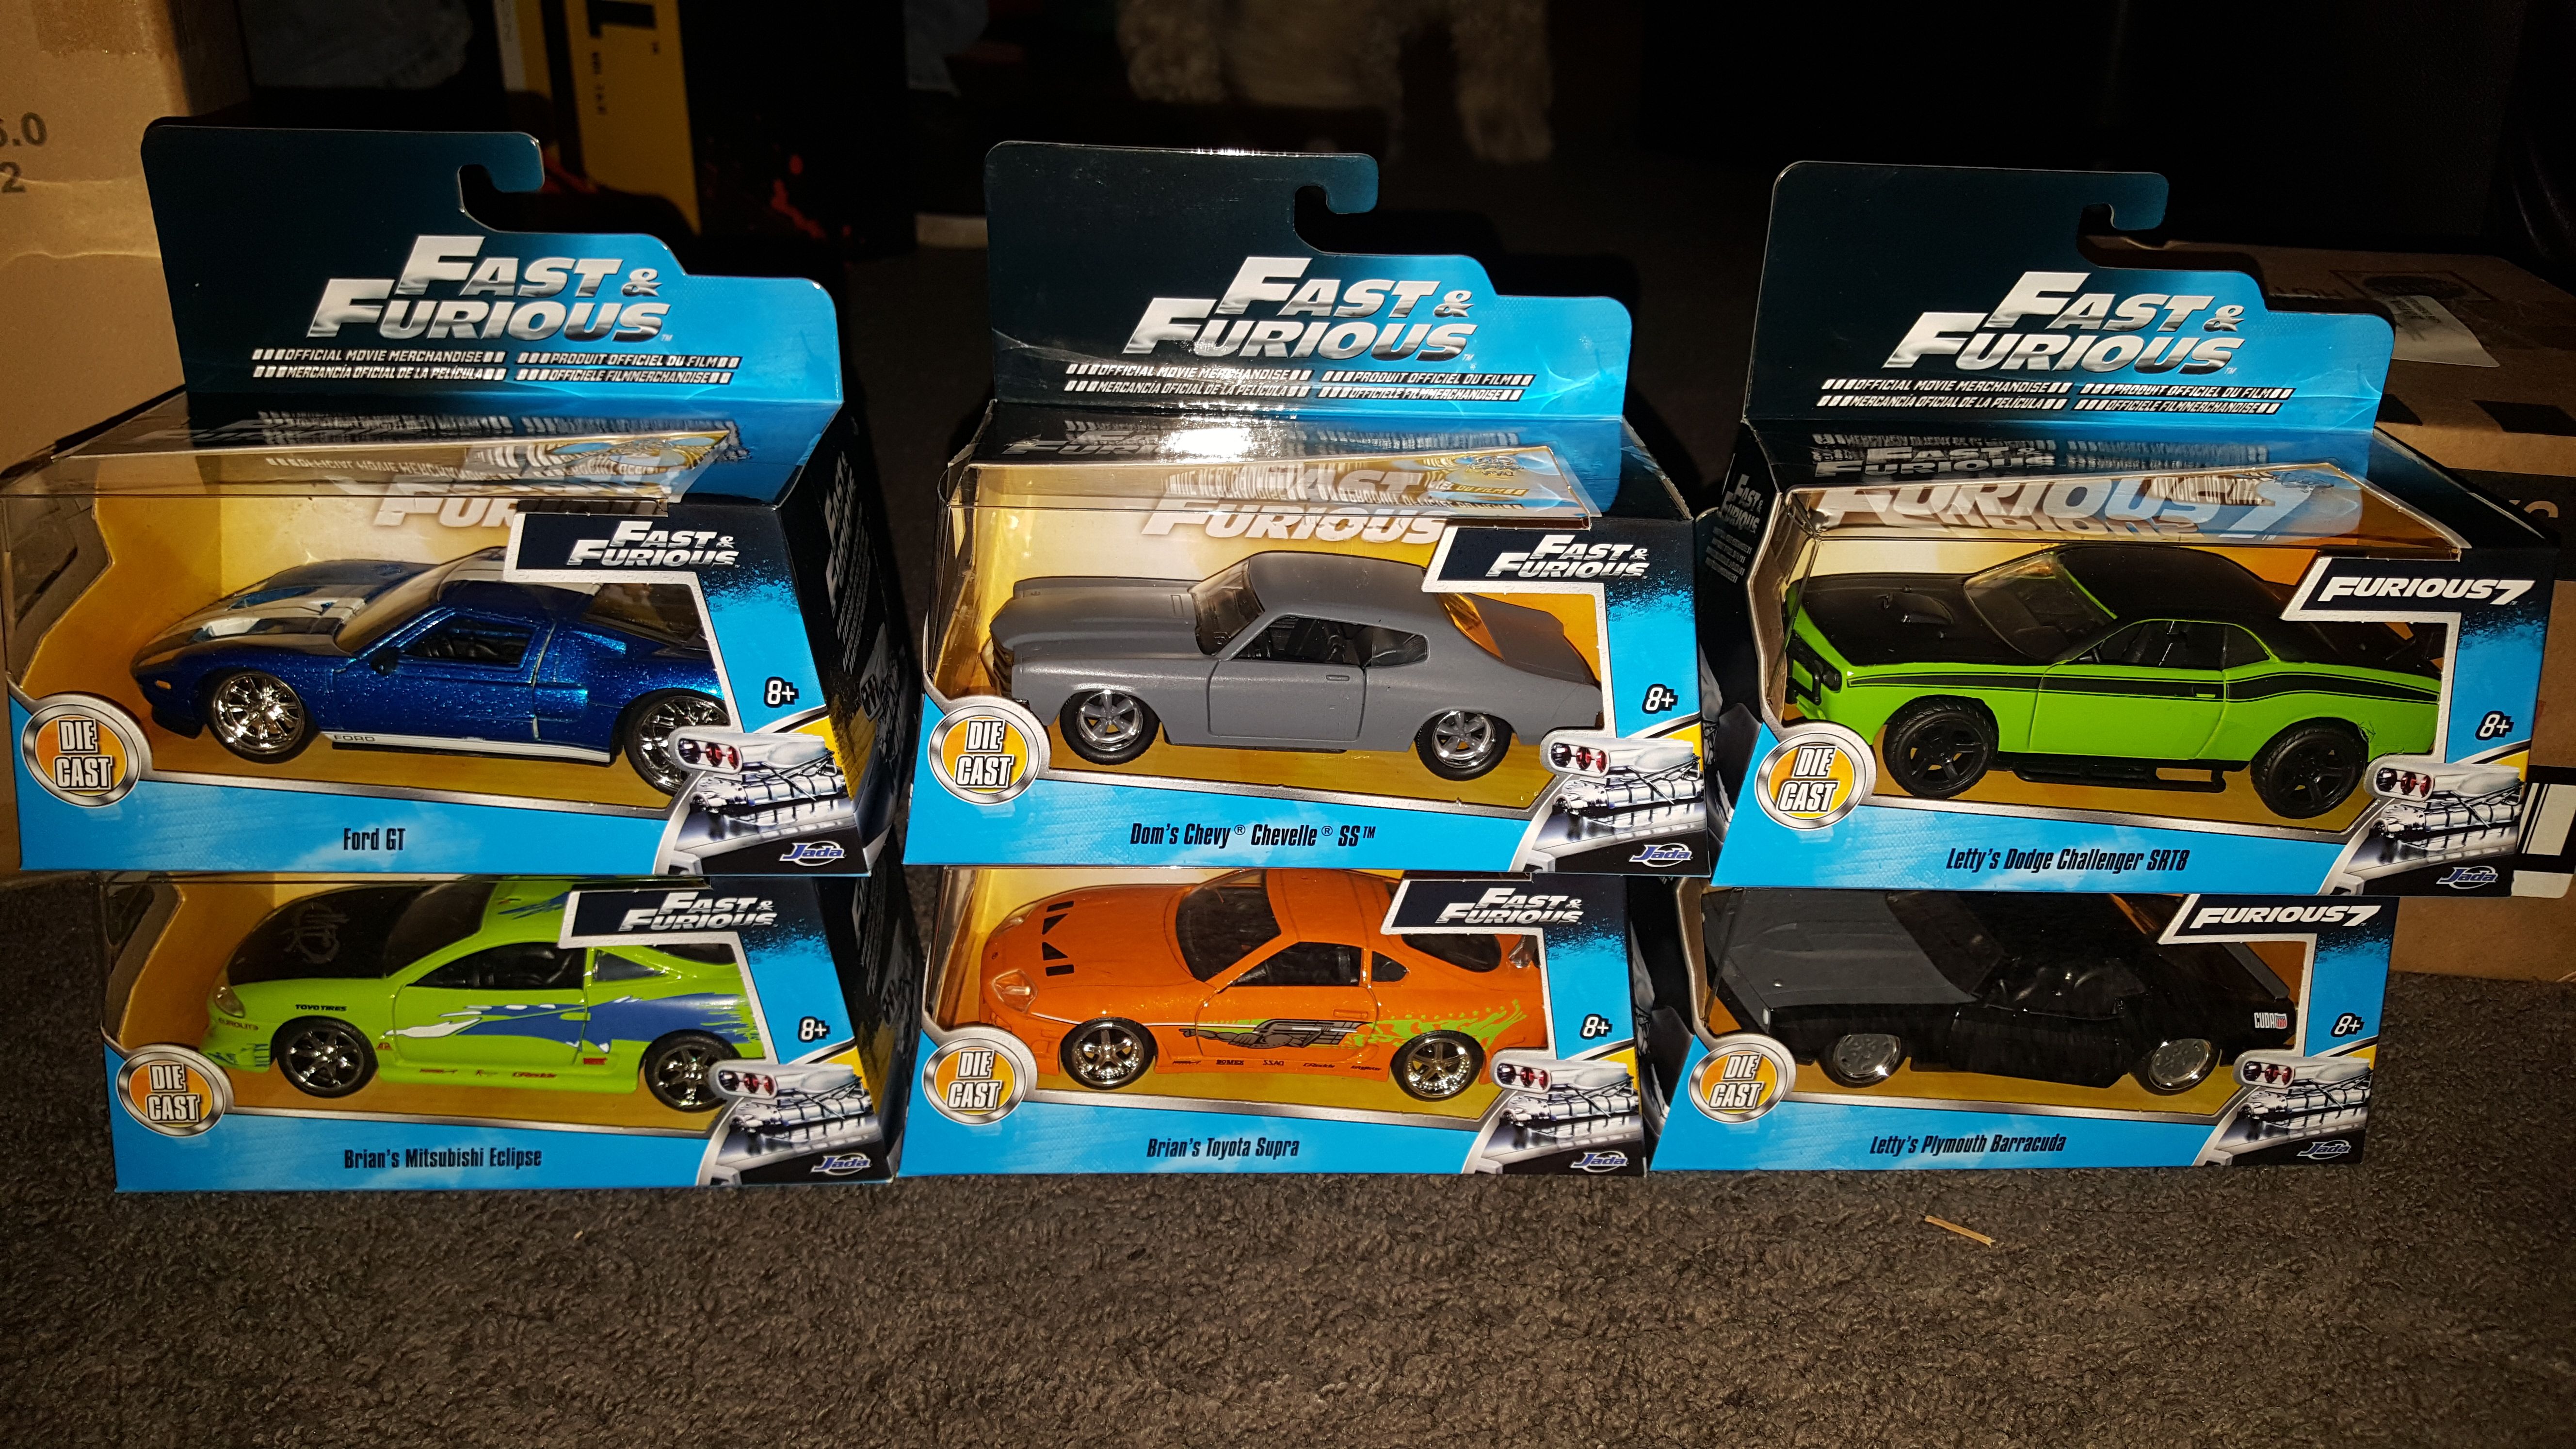 Fast and furious scale die cast